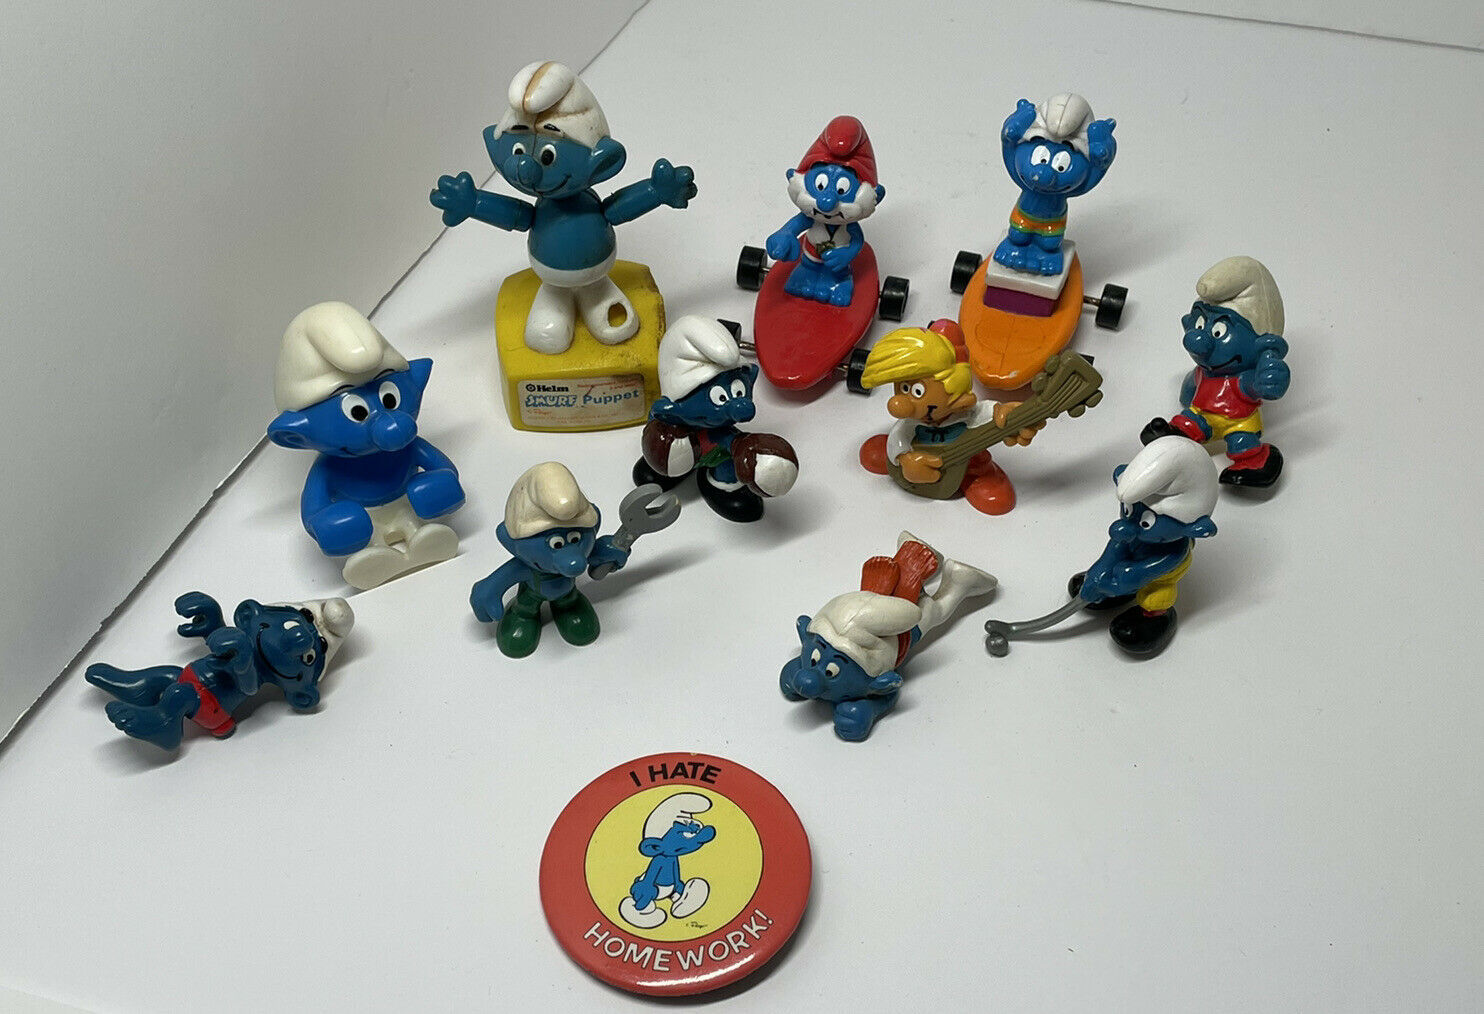 Smurf vintage lot Peyo schleich pvc figures and more - $13.10